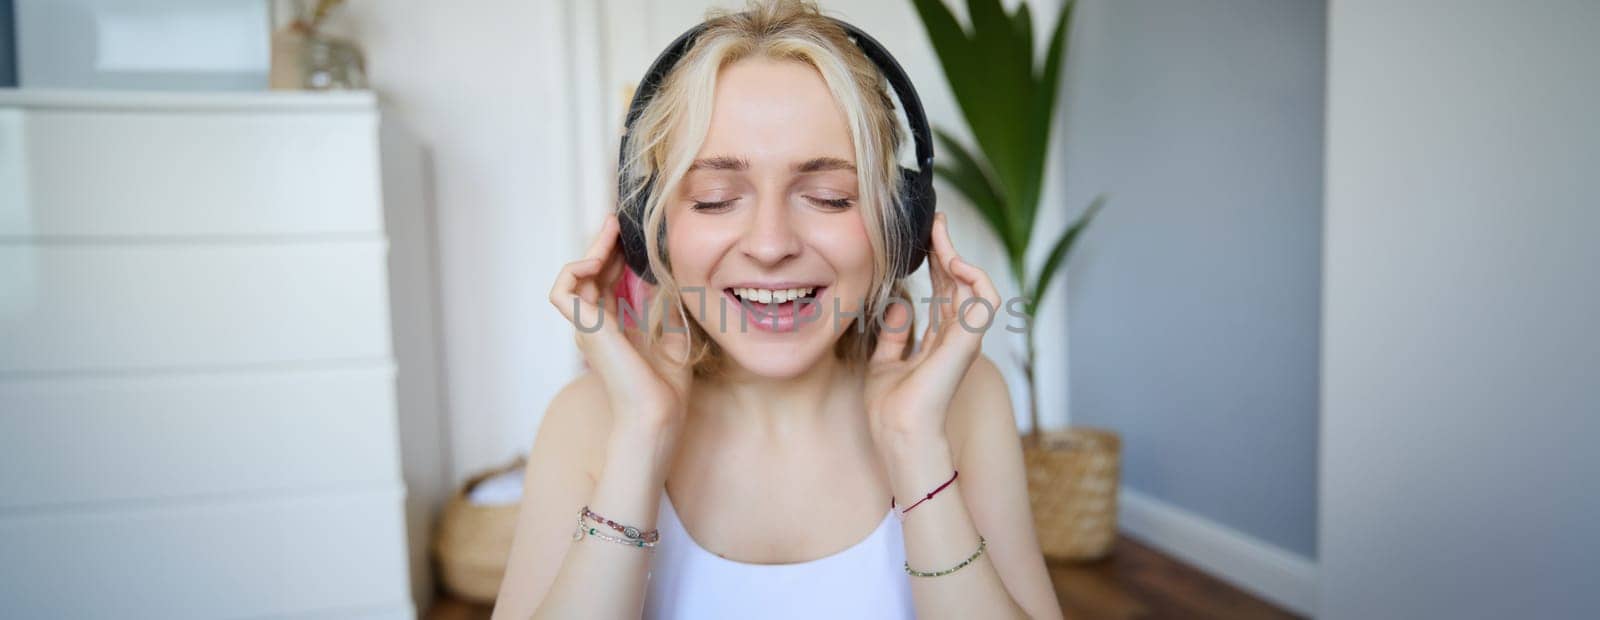 Close up portrait of woman smiling while listening to music in wireless headphones, singing with eyes closed.